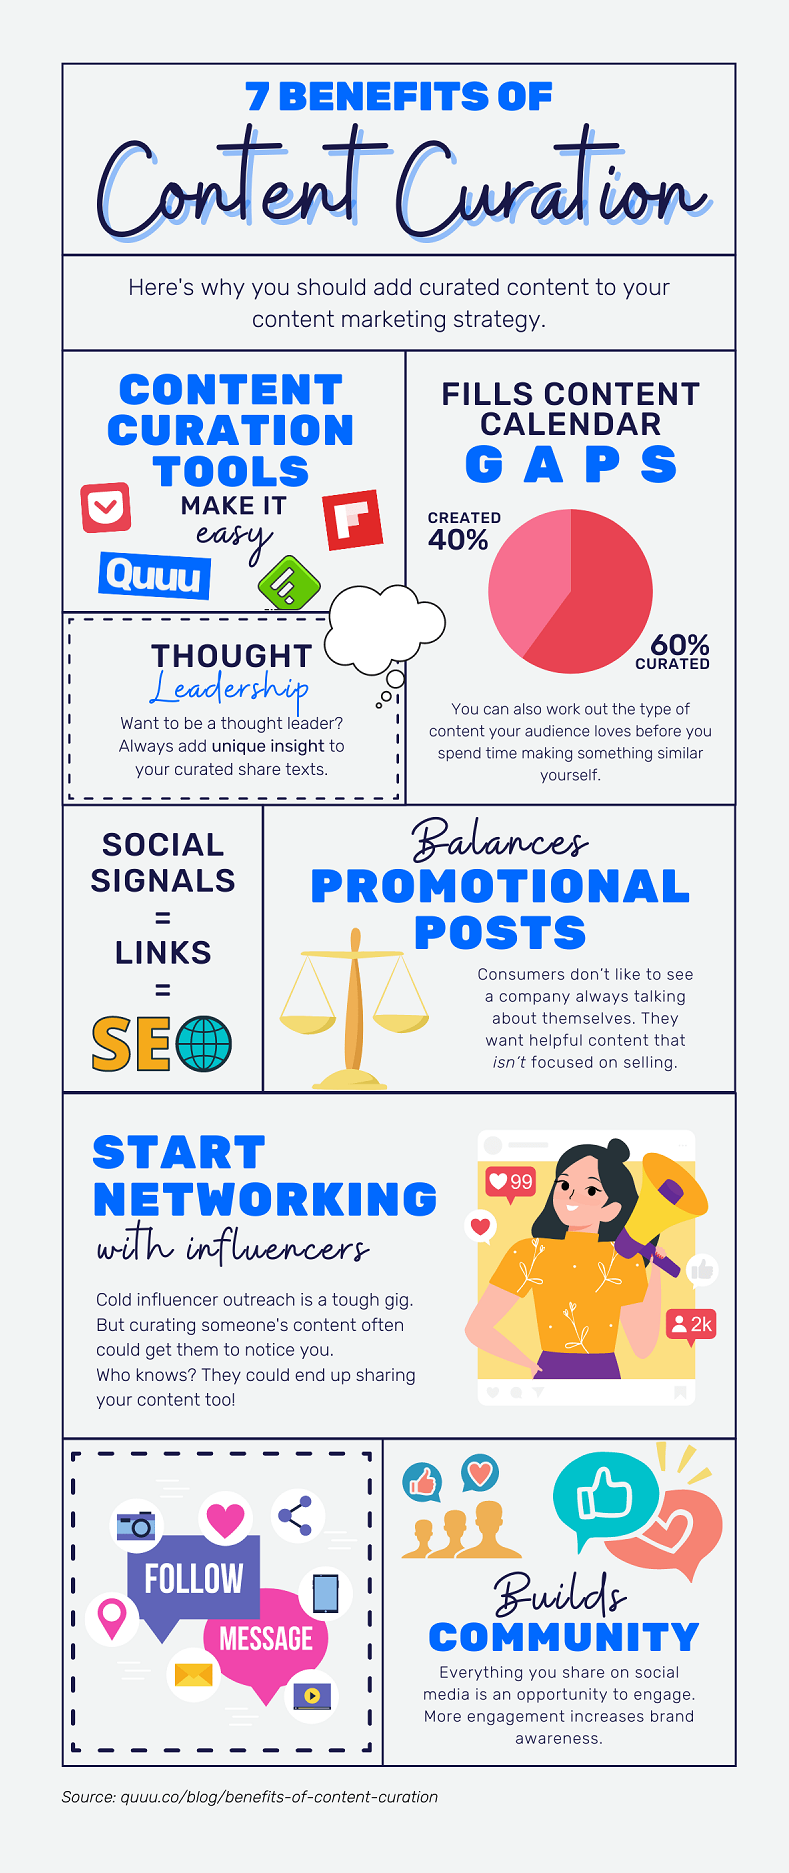 7 benefits of content curation infographic